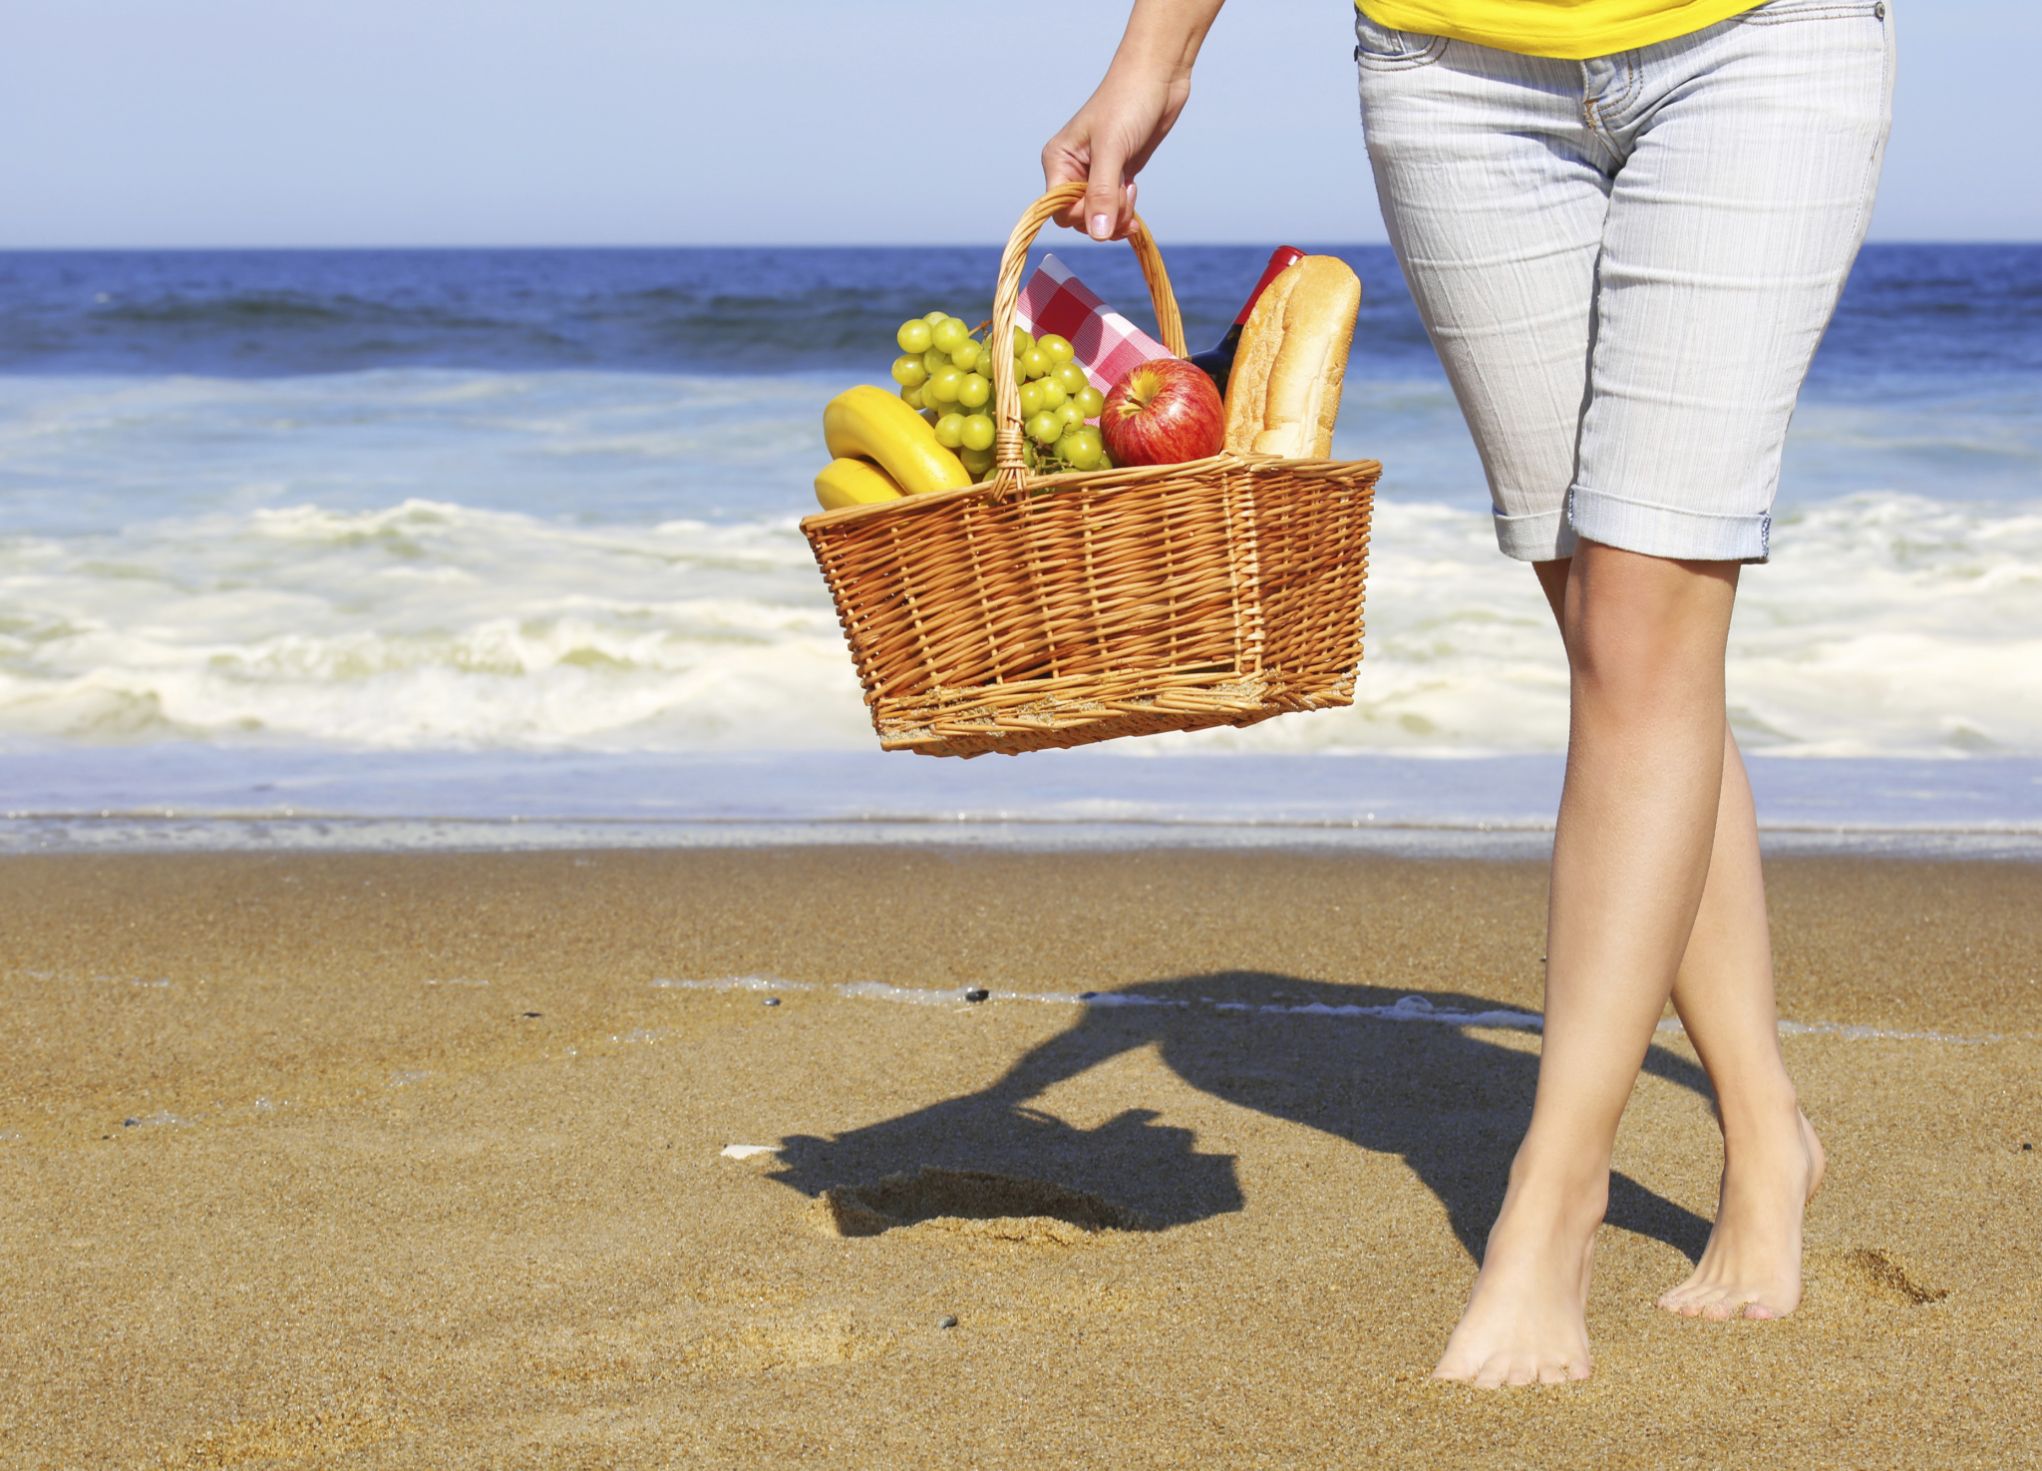 Picnic on the Beach. Female Legs and Basket with Food